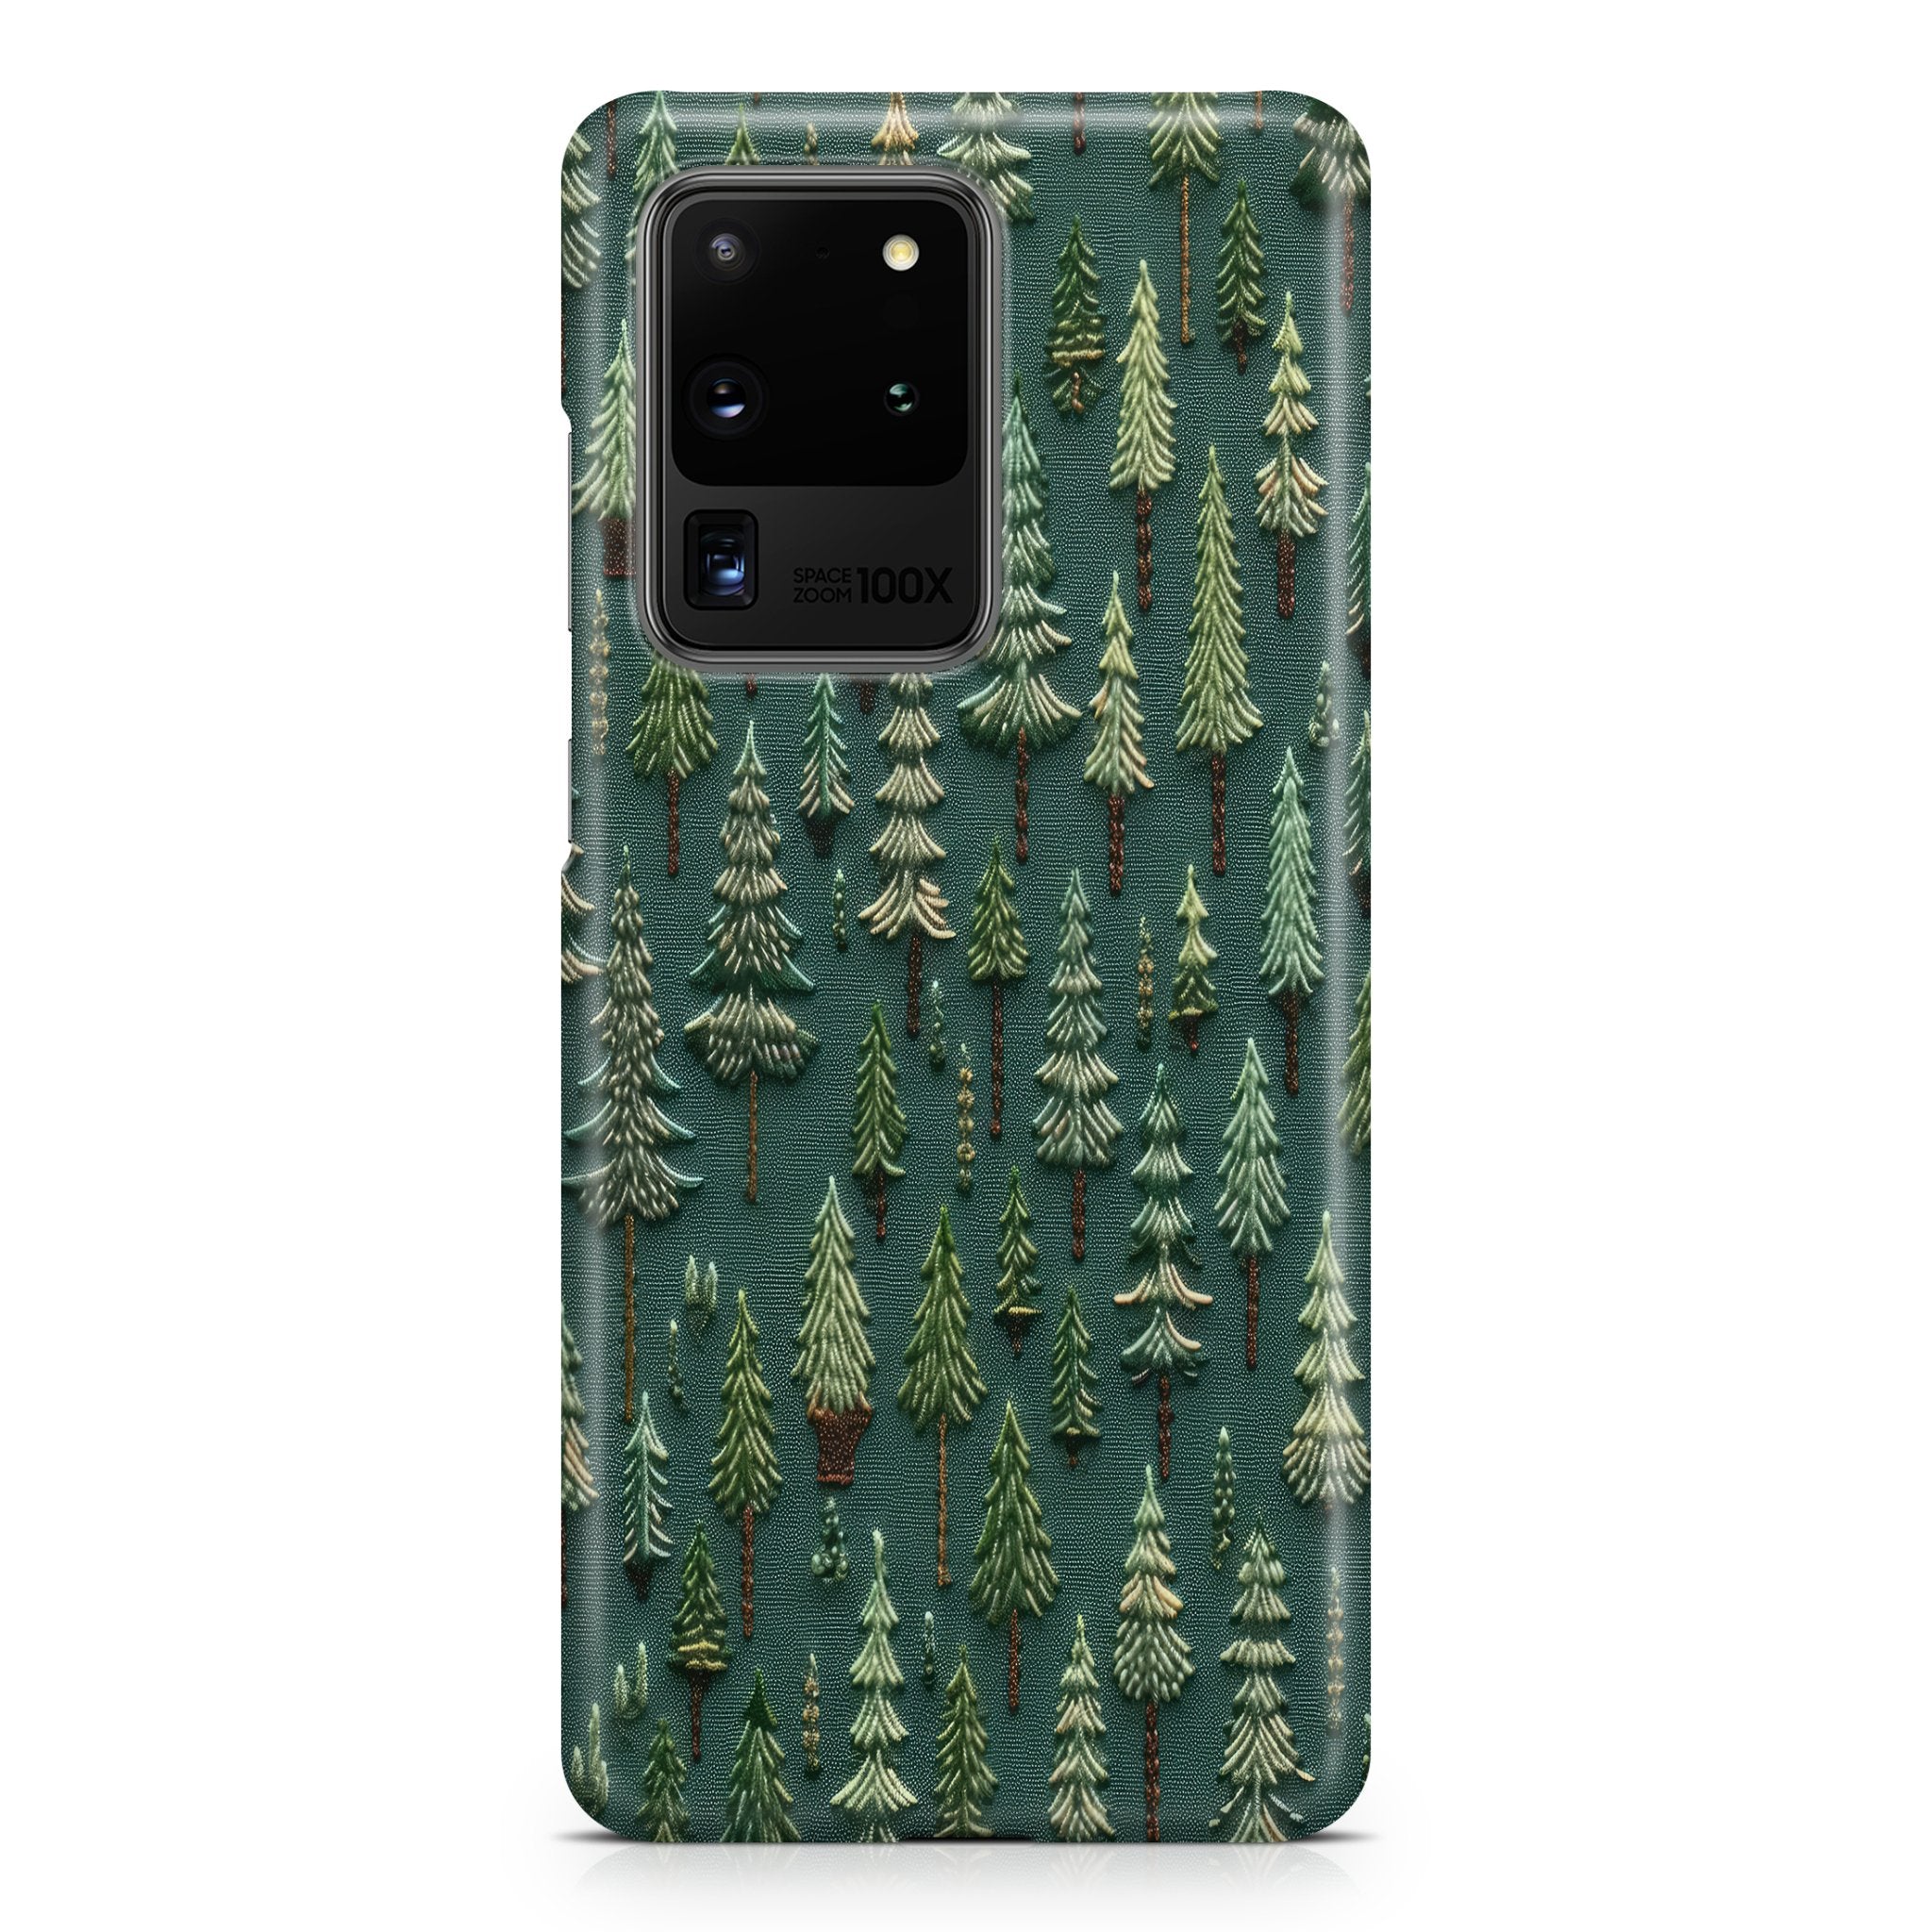 Embroidered Forest - Samsung phone case designs by CaseSwagger